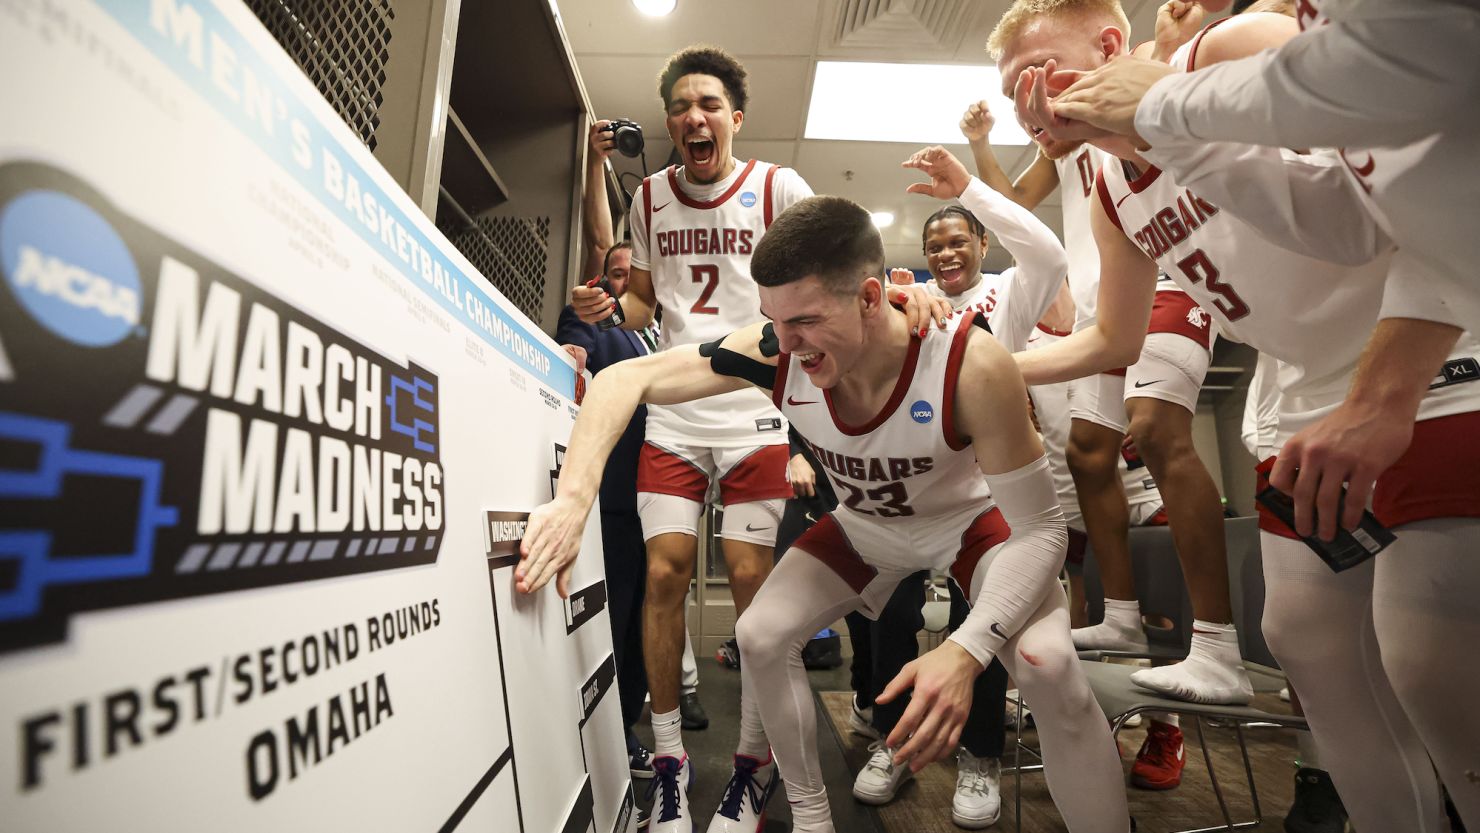 Andrej Jakimovski of the Washington State Cougars moves his team's card into the second-round spot on the March Madness bracket after defeating the Drake Bulldogs in the first round.